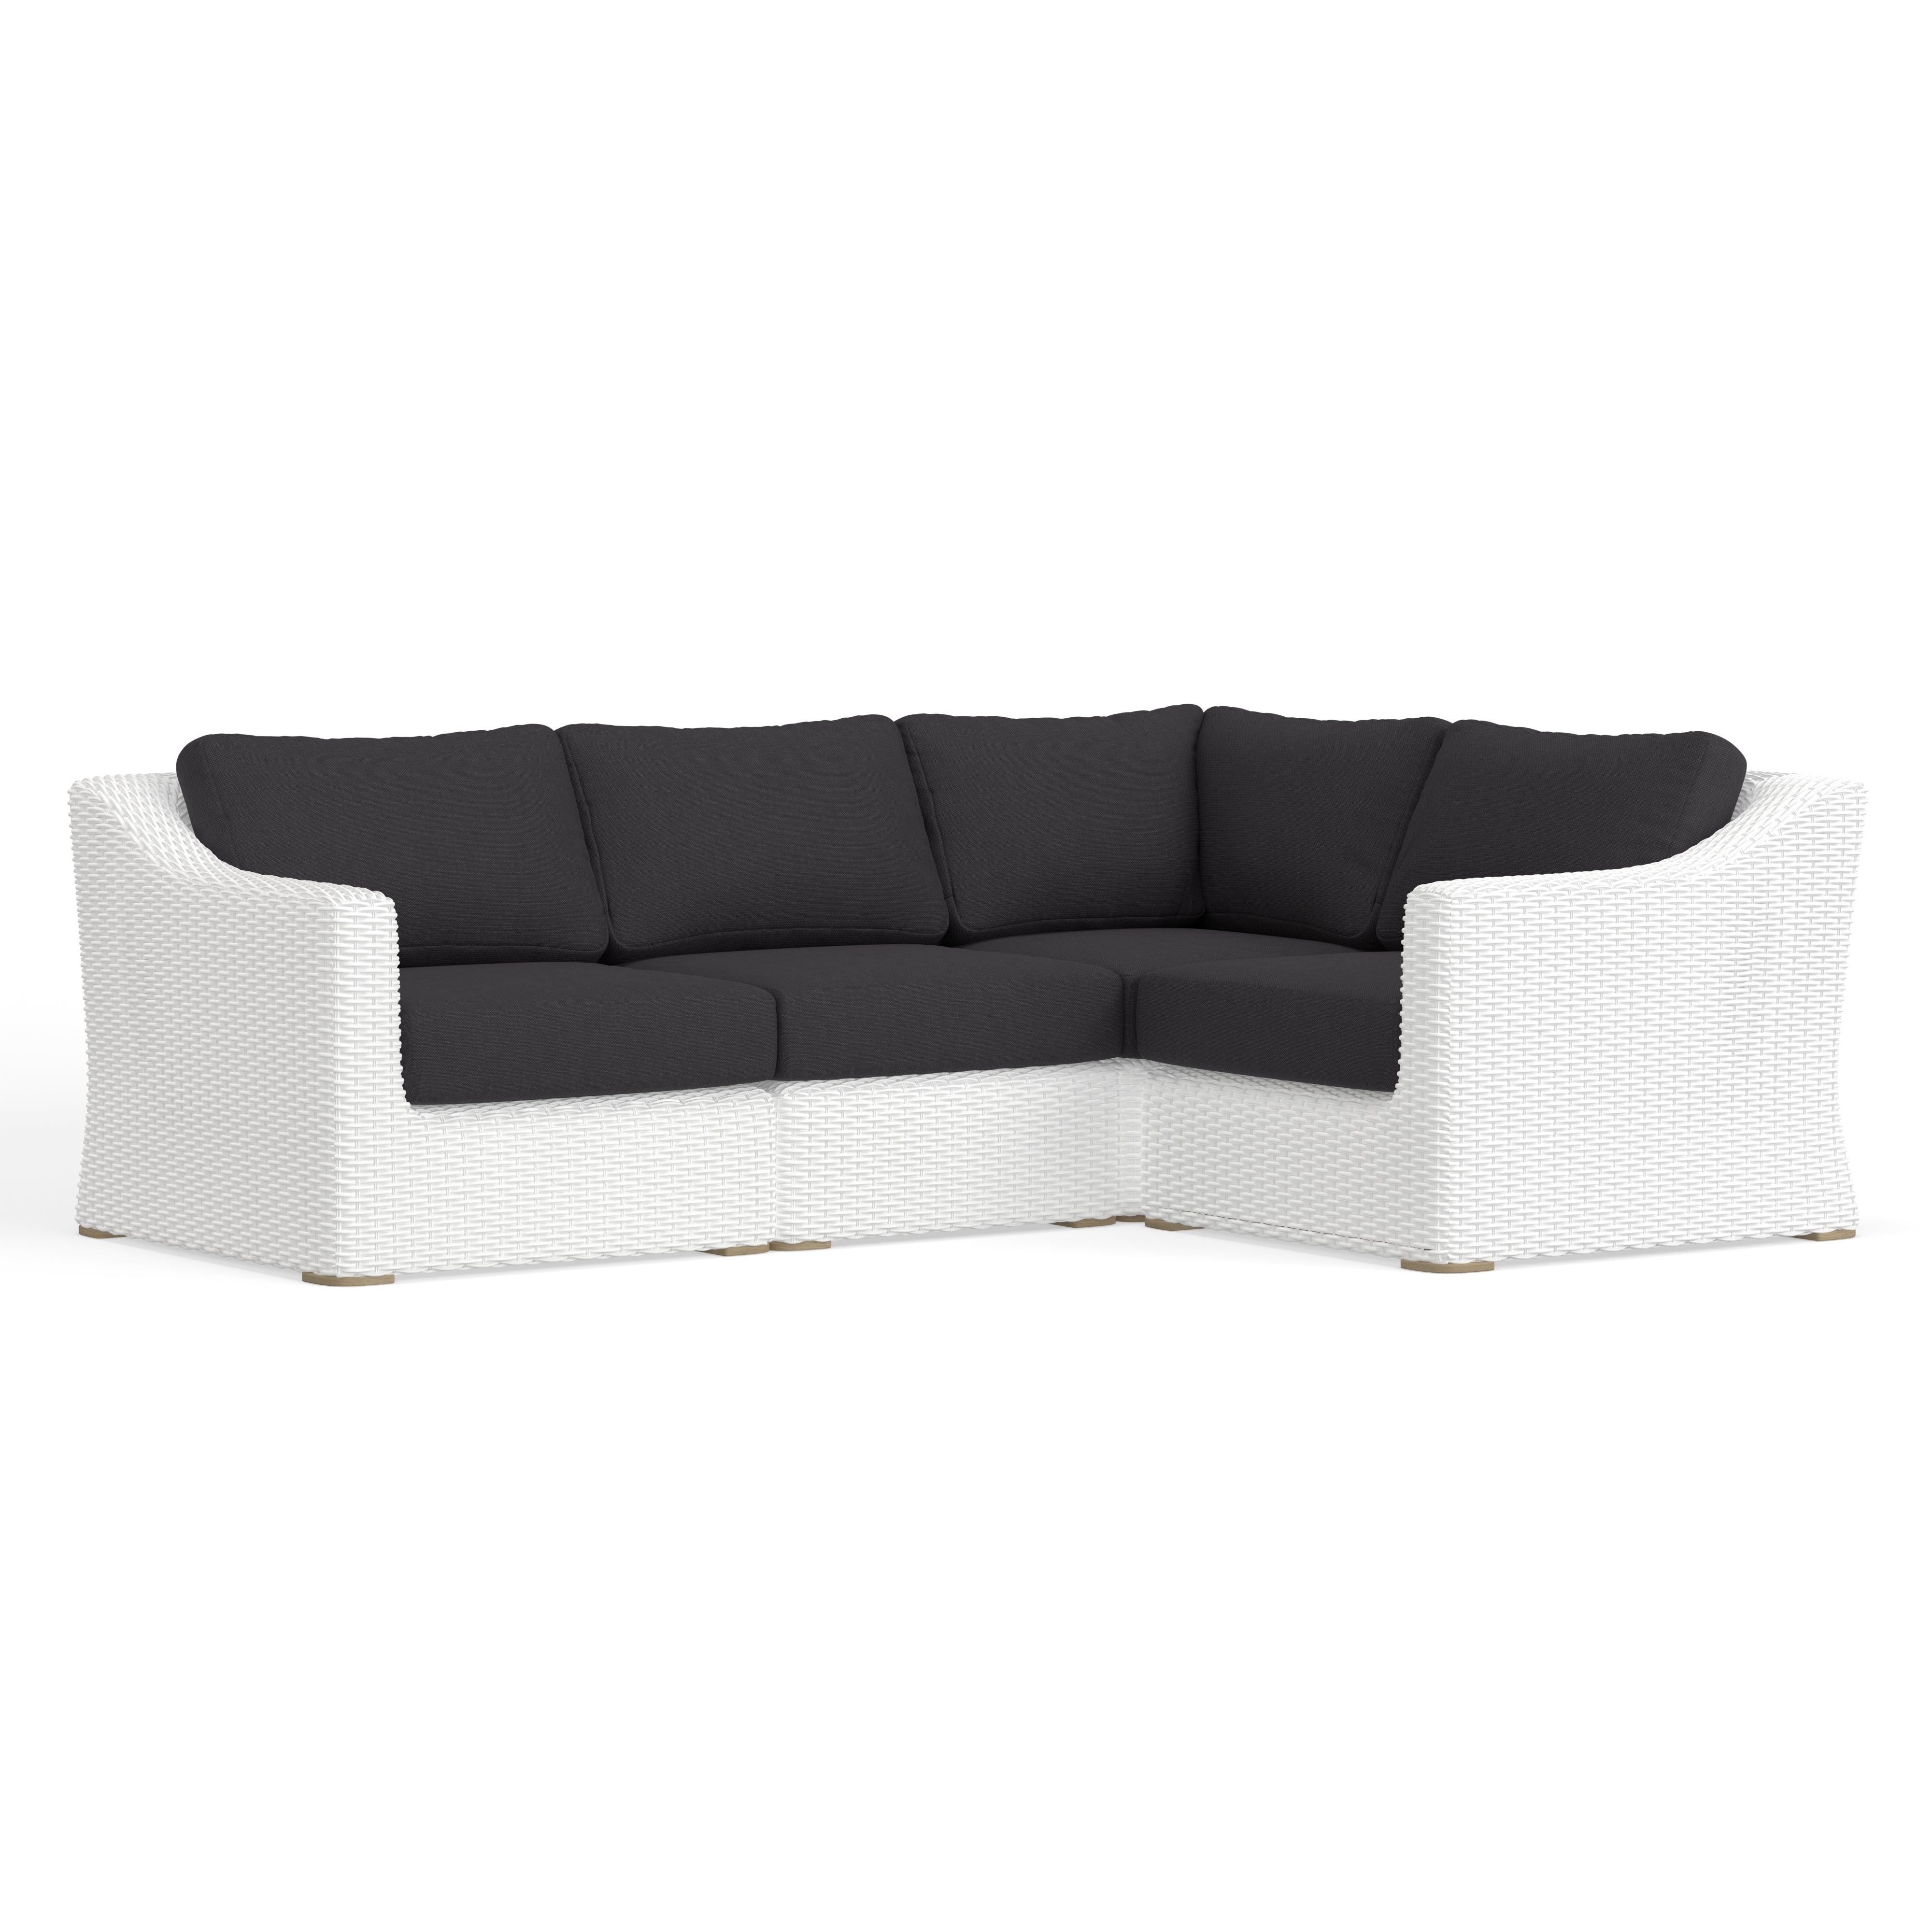 4 Person Sectional For Outdoor Use